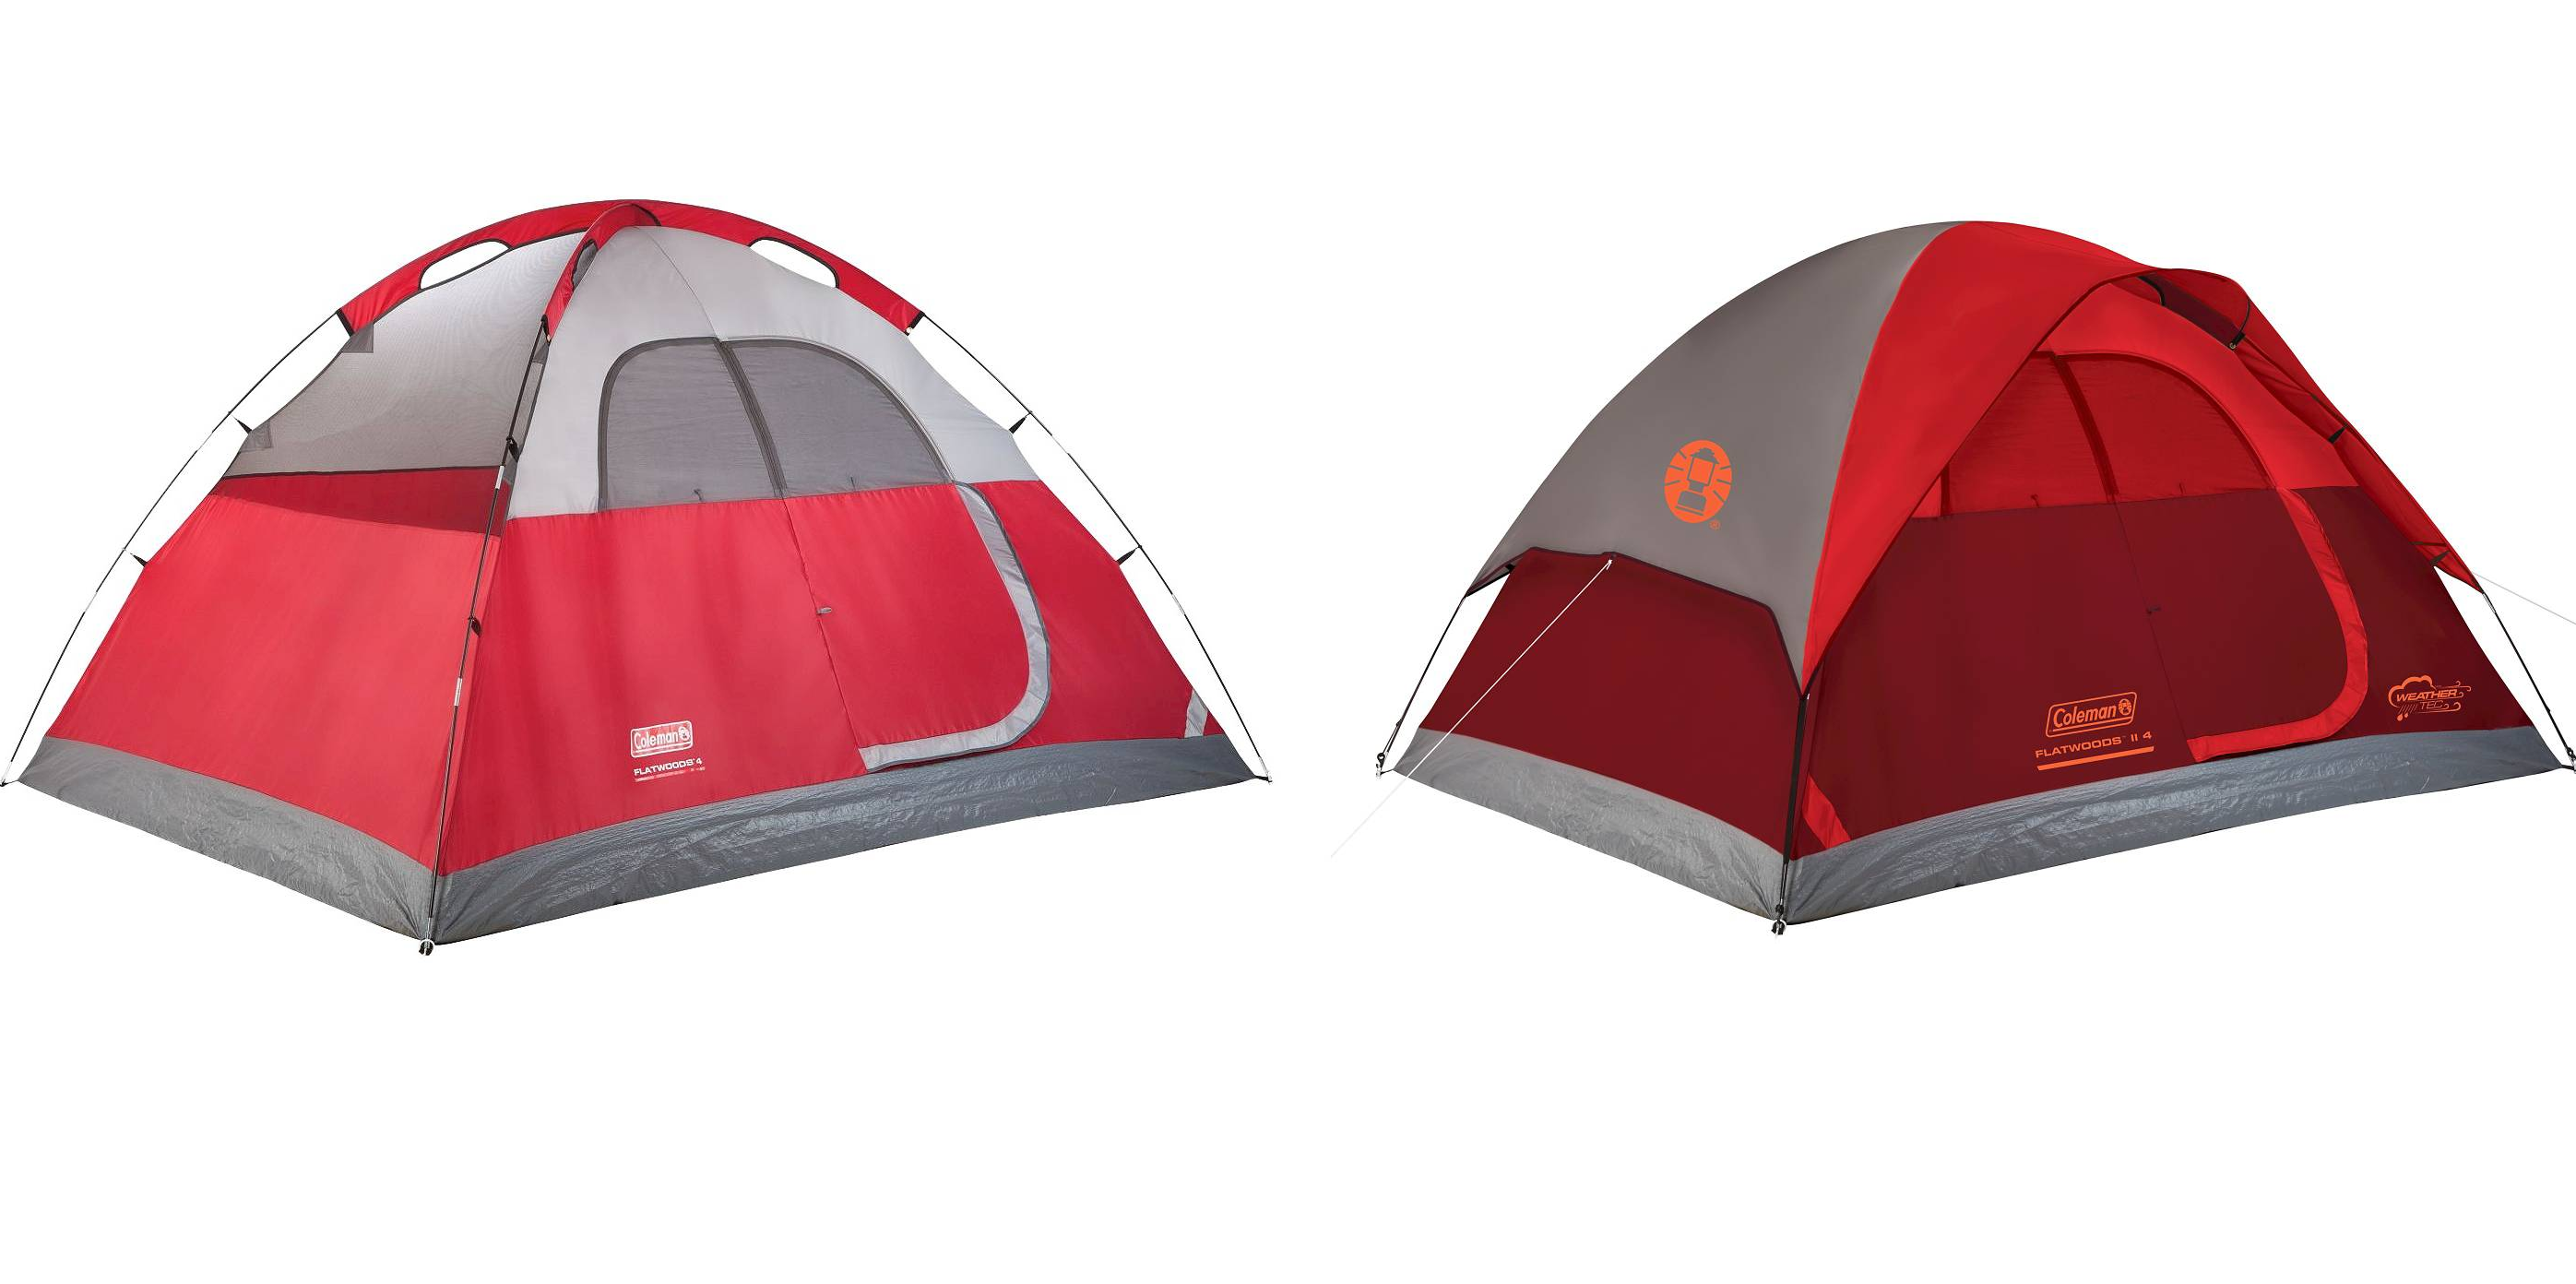 Coleman Flatwoods II 4 Person Tent Only $39.99! (Reg $59.99)